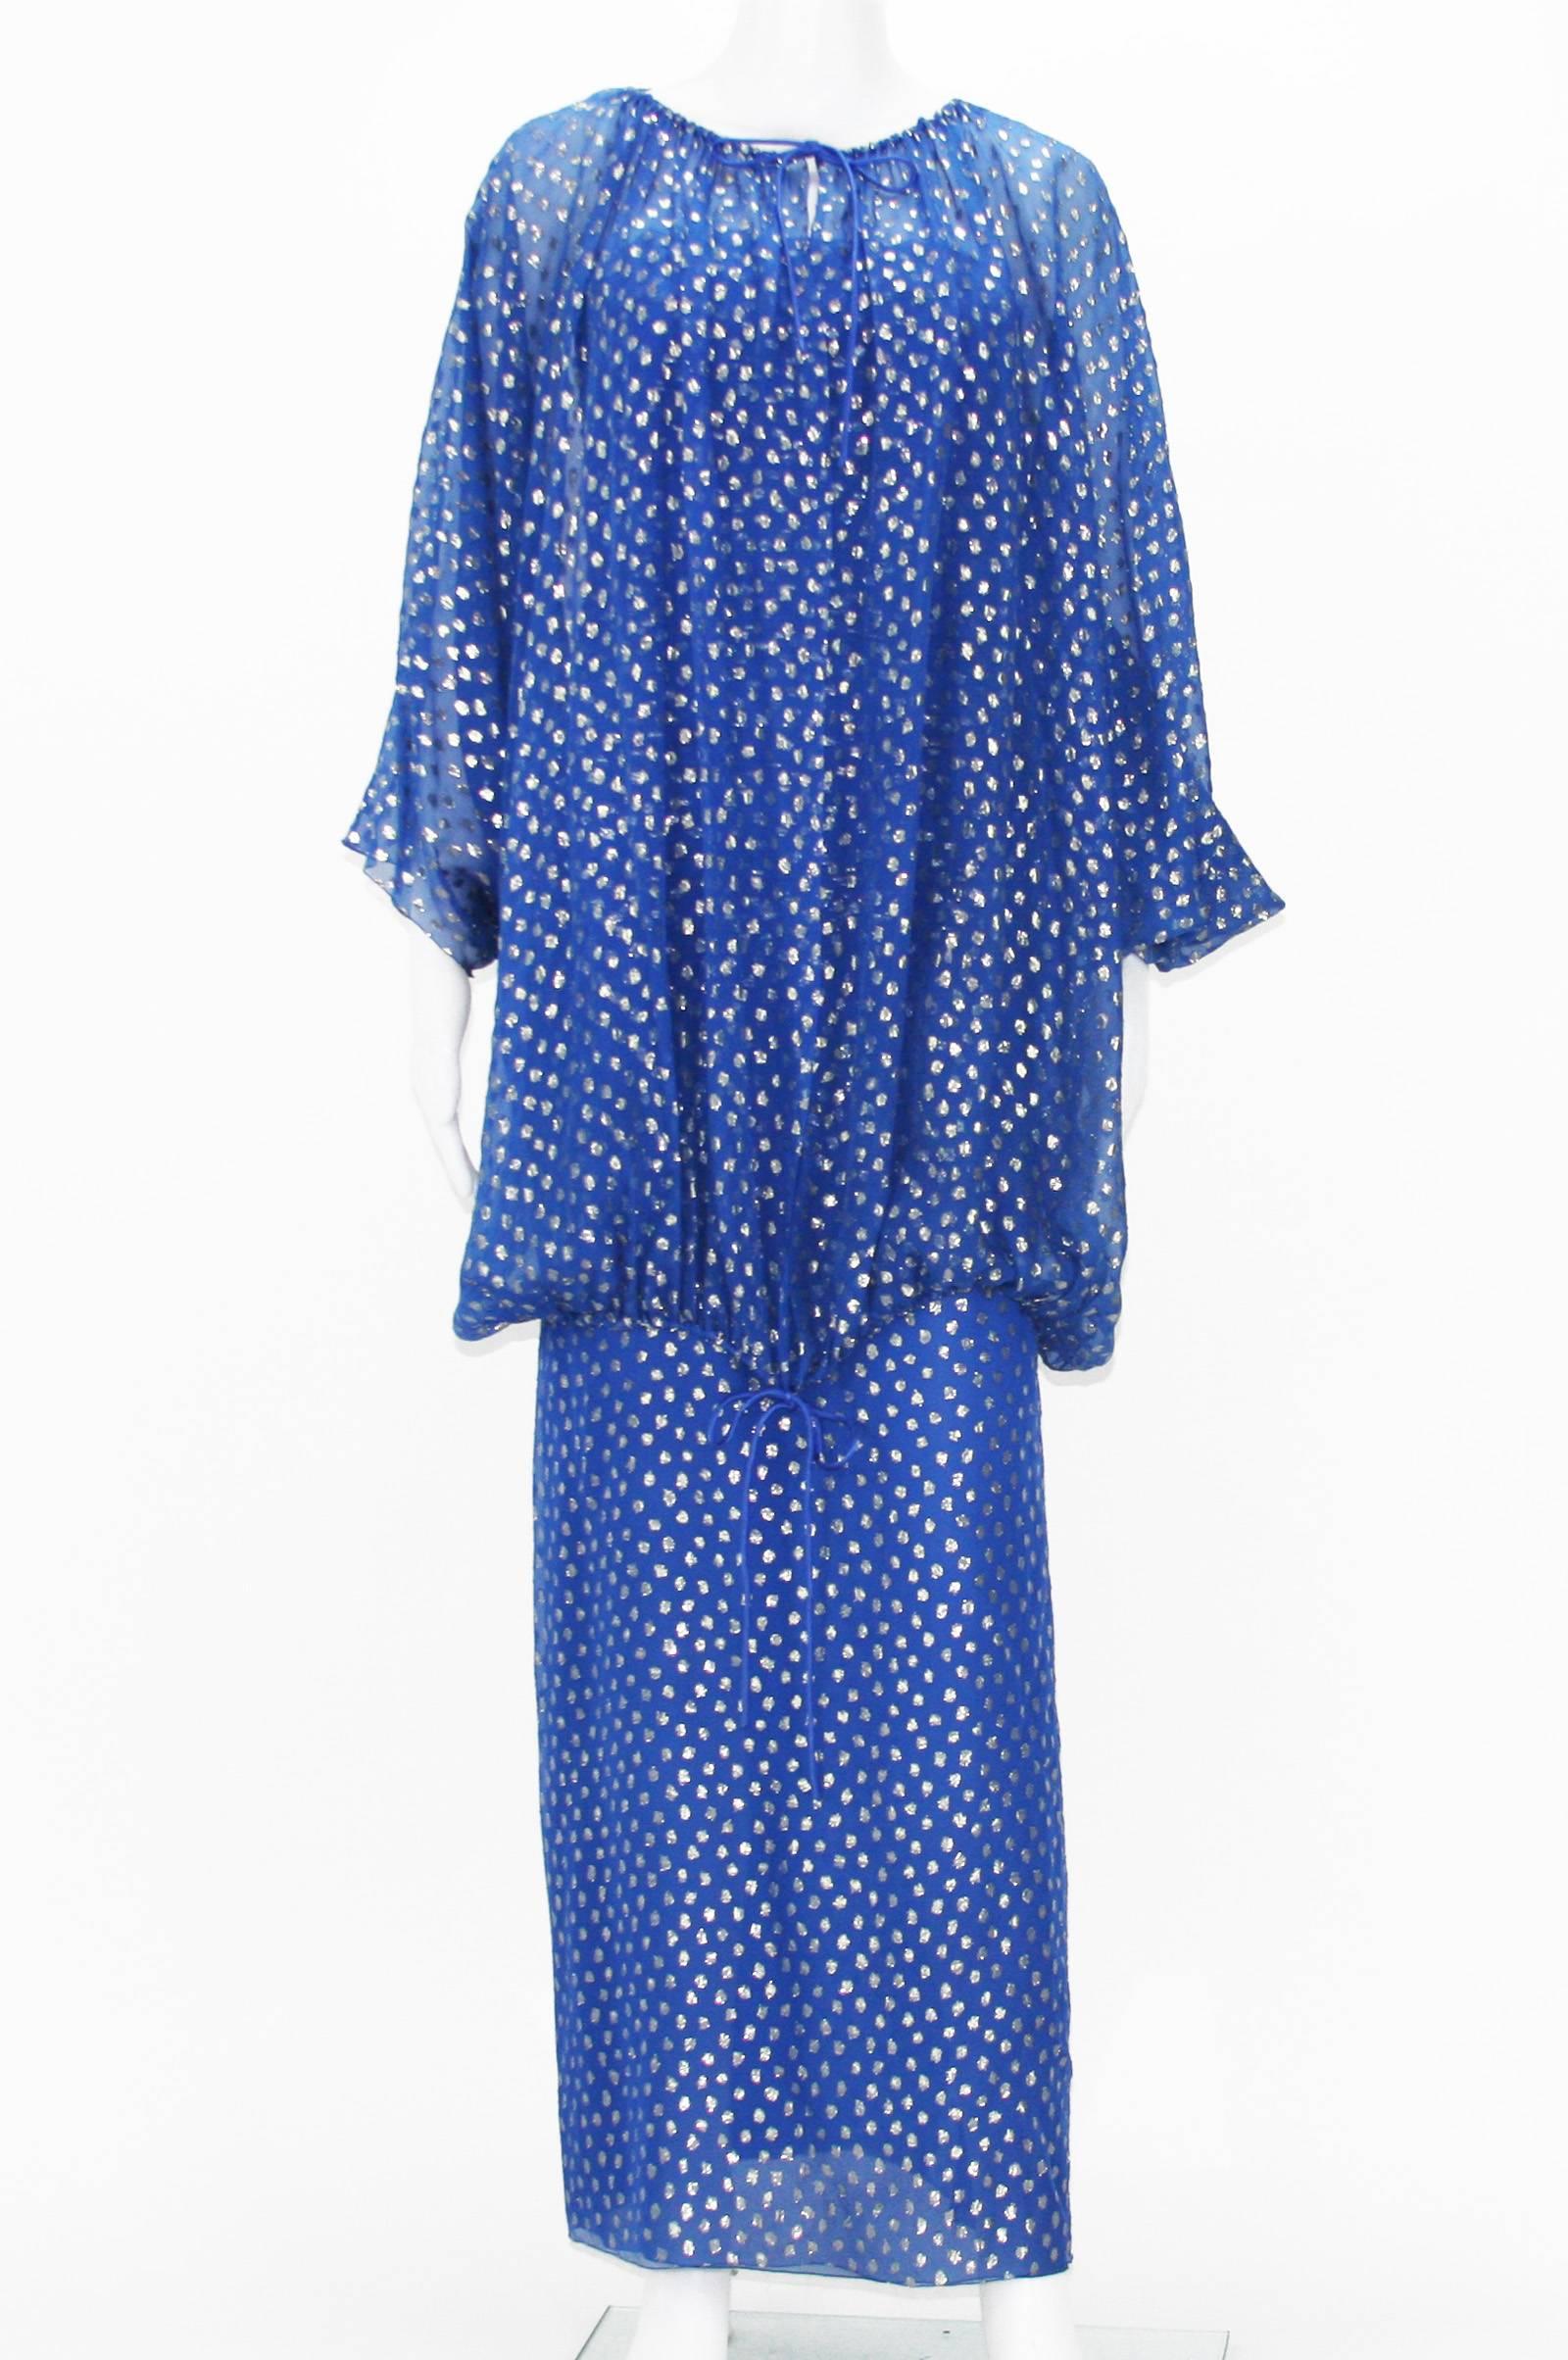 Christian Dior Paris
Automne-Hiver 1976, Numbered - 8194
Polka Dot Blue Sheer with Metallic Silver Dots Dress Set.
Dress - Strapless, Draped, Side Slit, Fully Lined, Elastic Band at Bust, Side Zip Closure.
Measurements: Length - 49 inches, Bust -